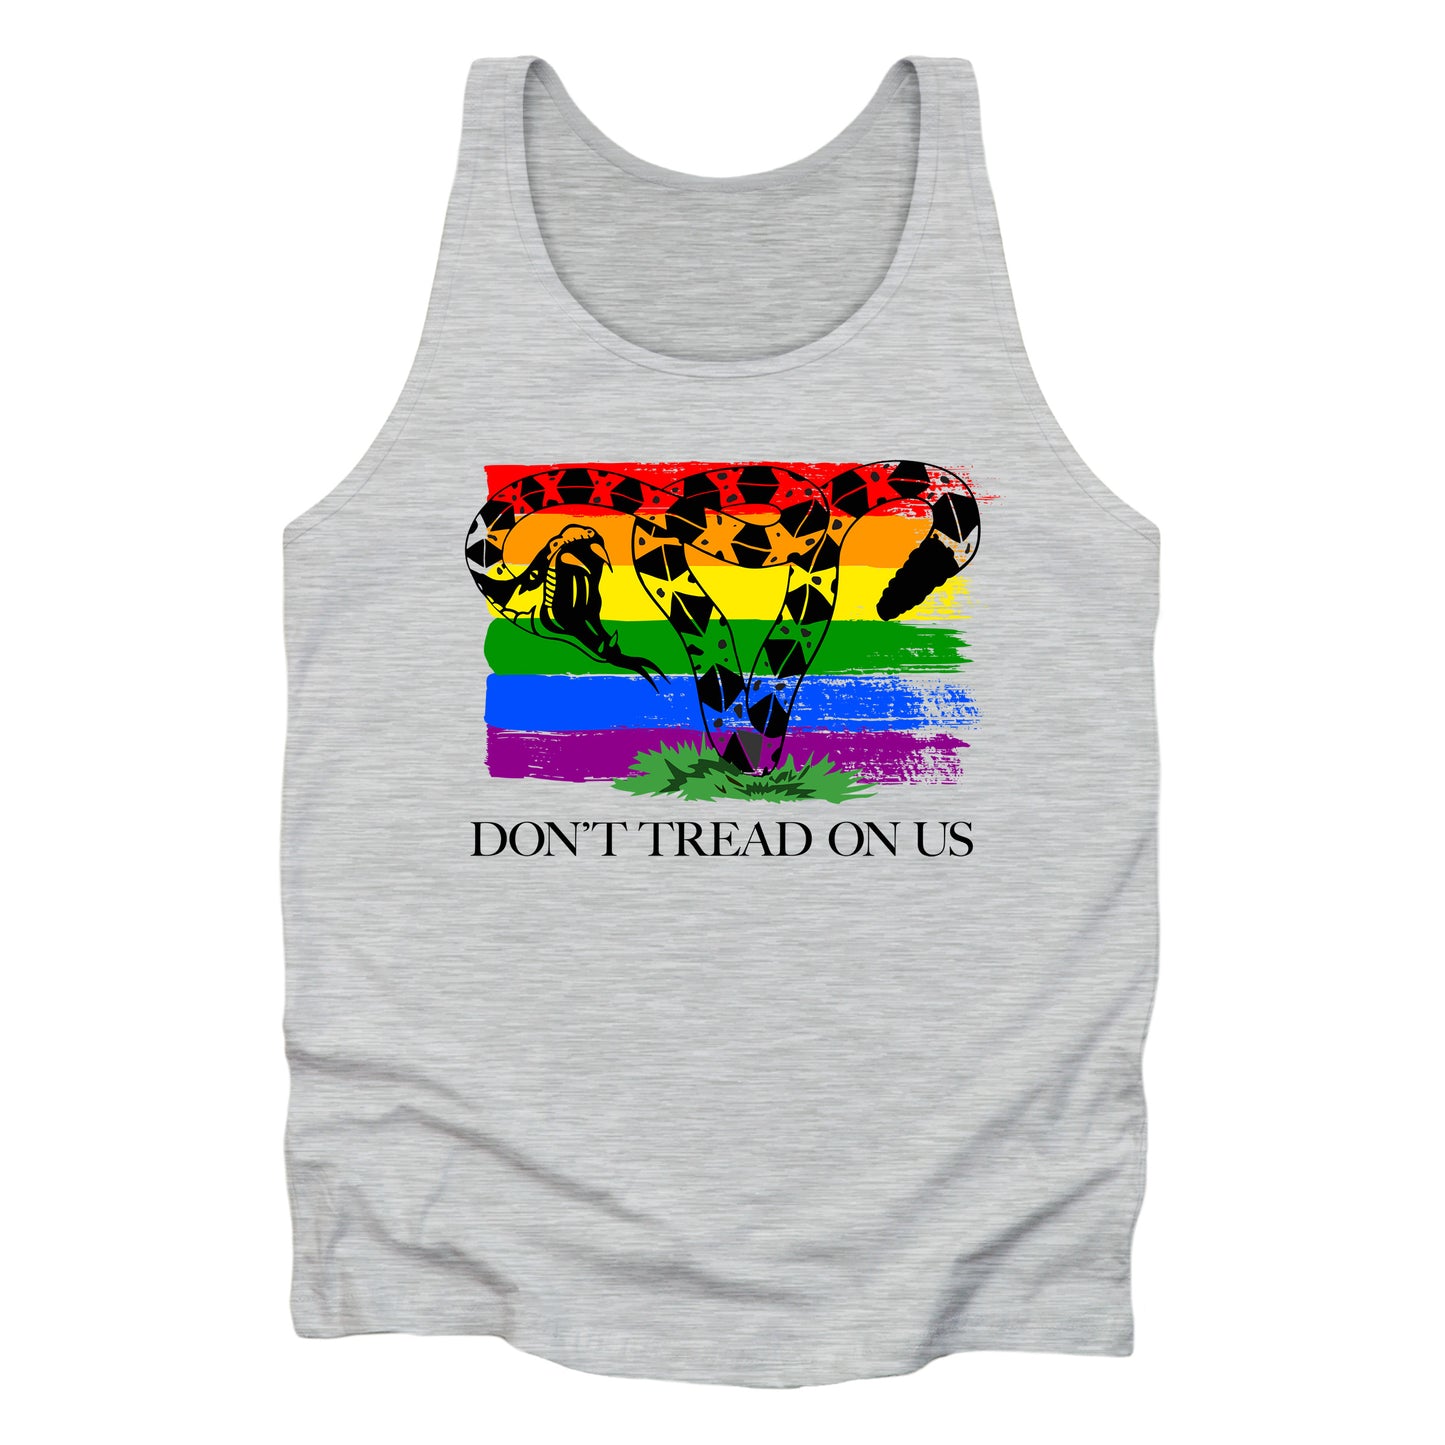 Athletic Heather unisex tank top with the “Don’t tread on me” snake redrawn into the shape of a uterus. A rainbow flag is painted in the background. Underneath the image reads “Don’t tread on us” in all caps.